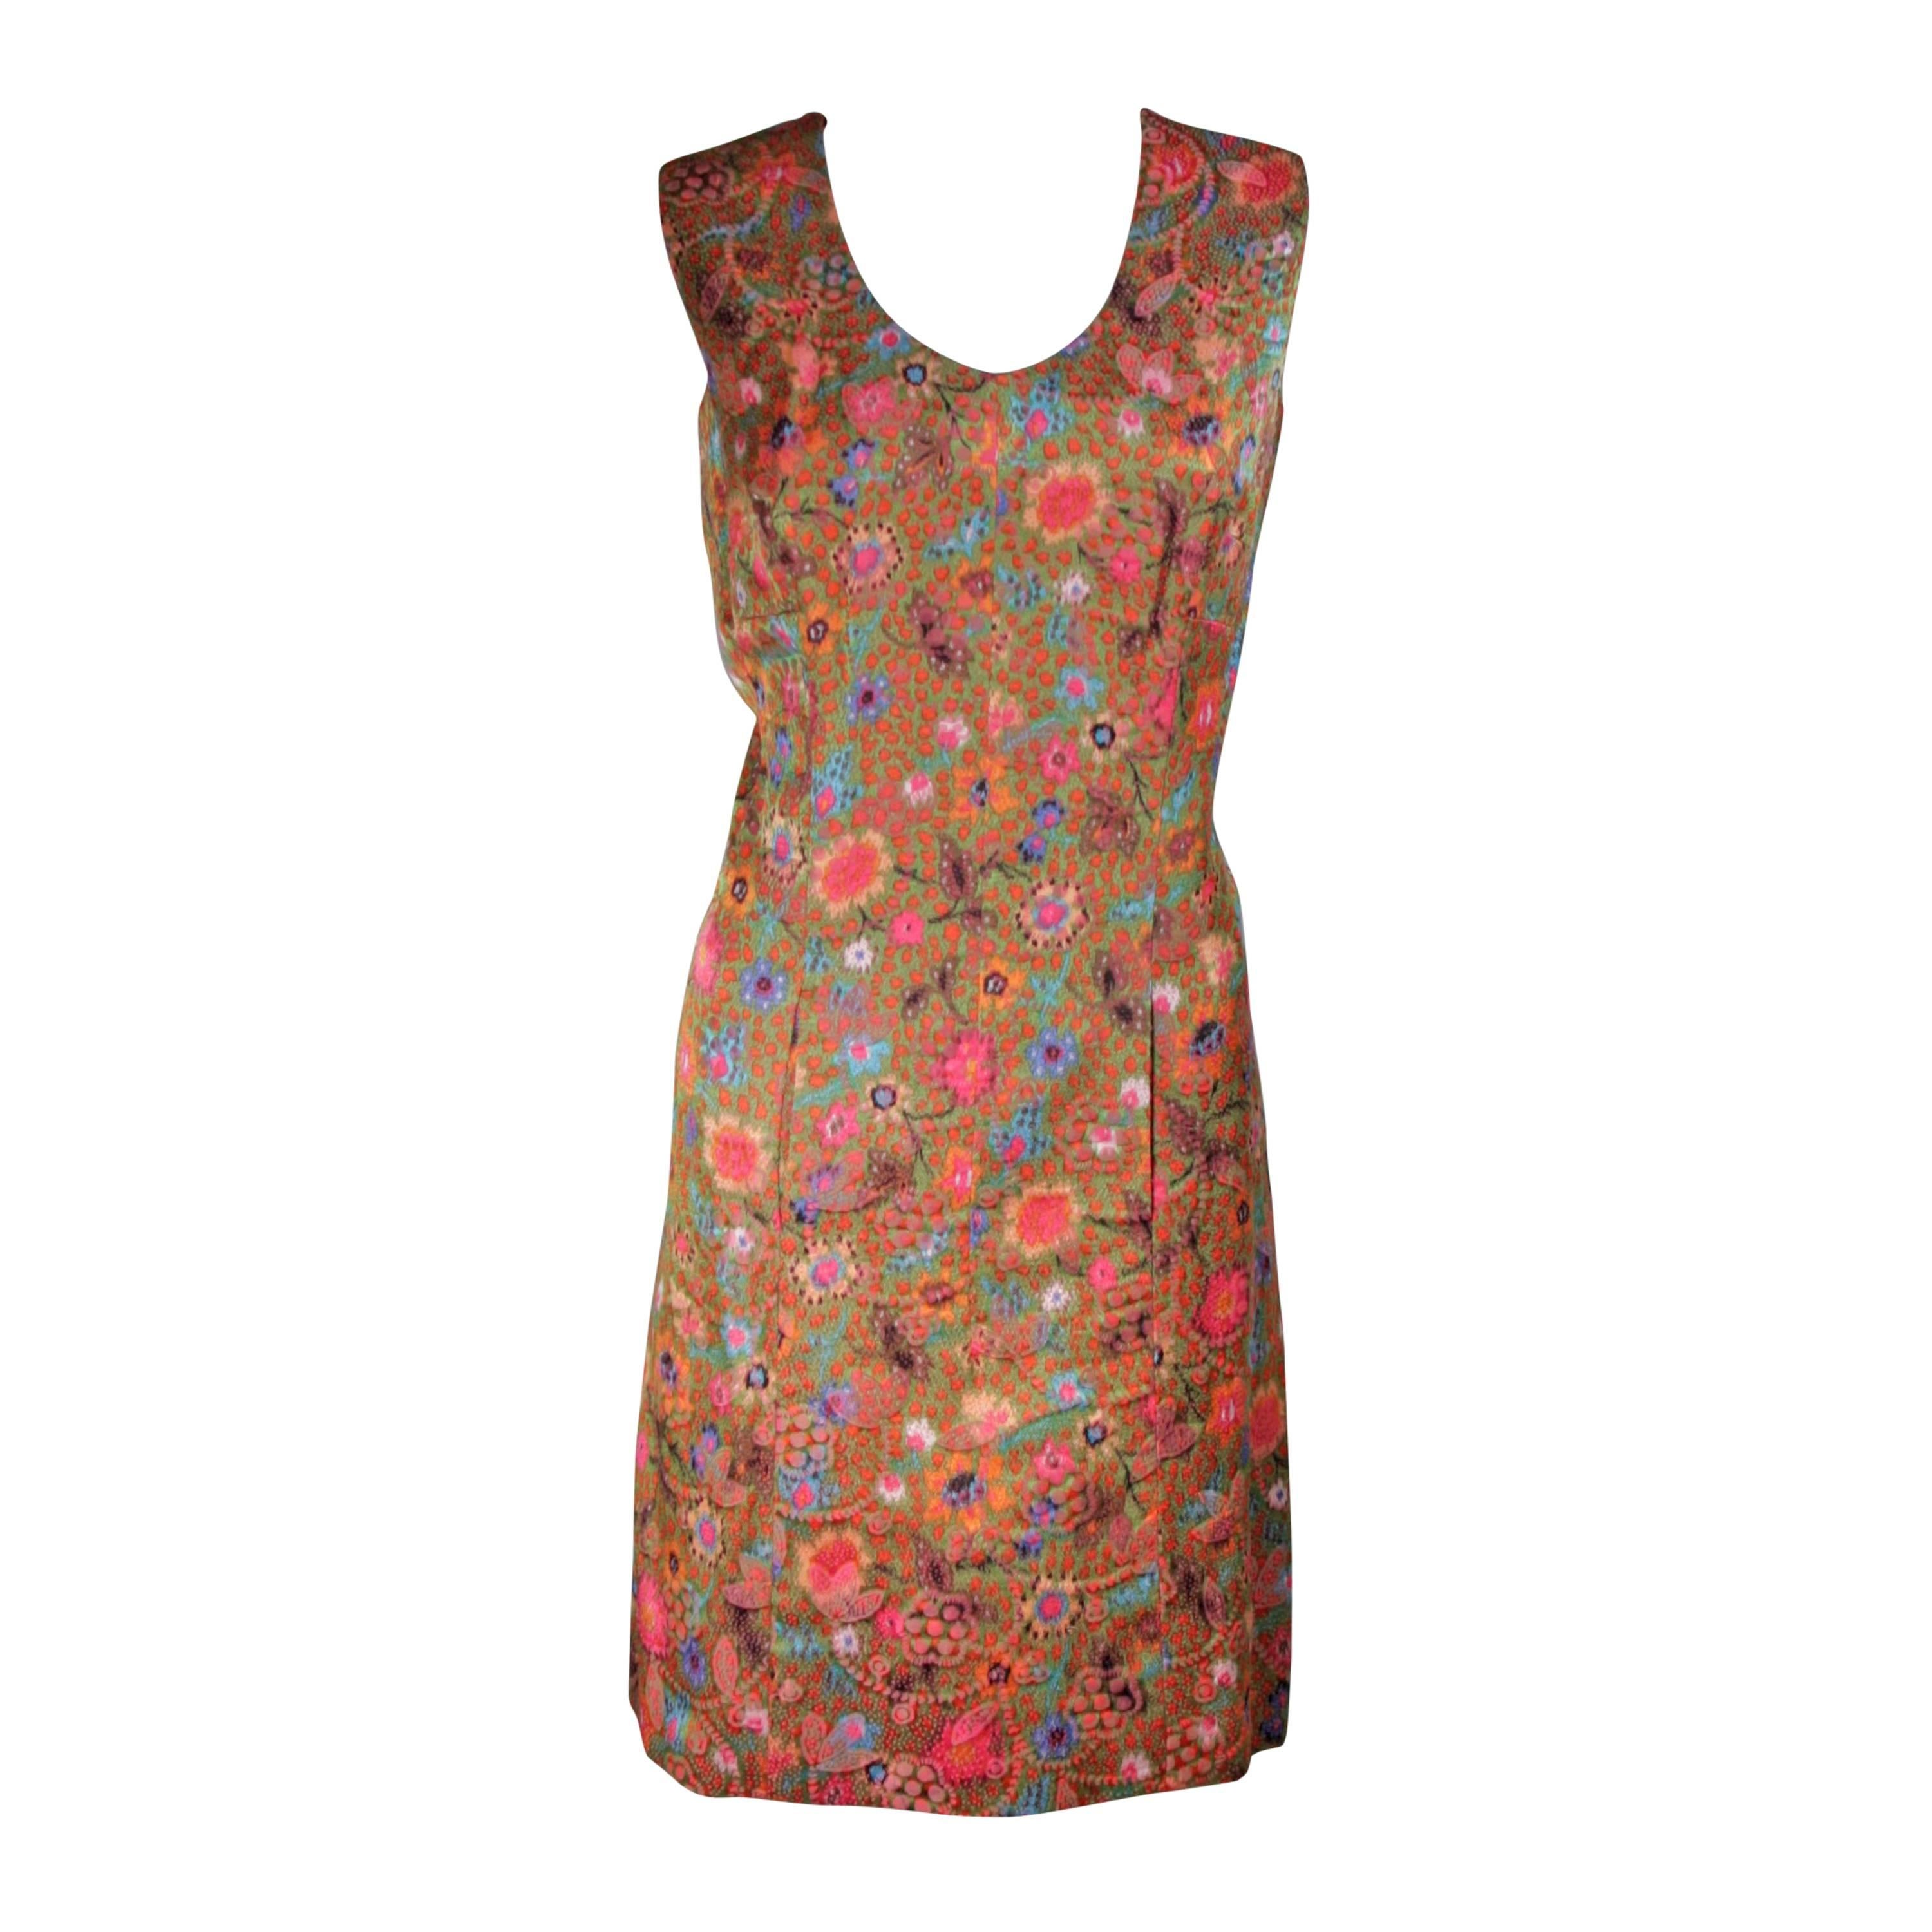 Galanos Floral Print Shift Dress with Pockets Size Small Medium For Sale